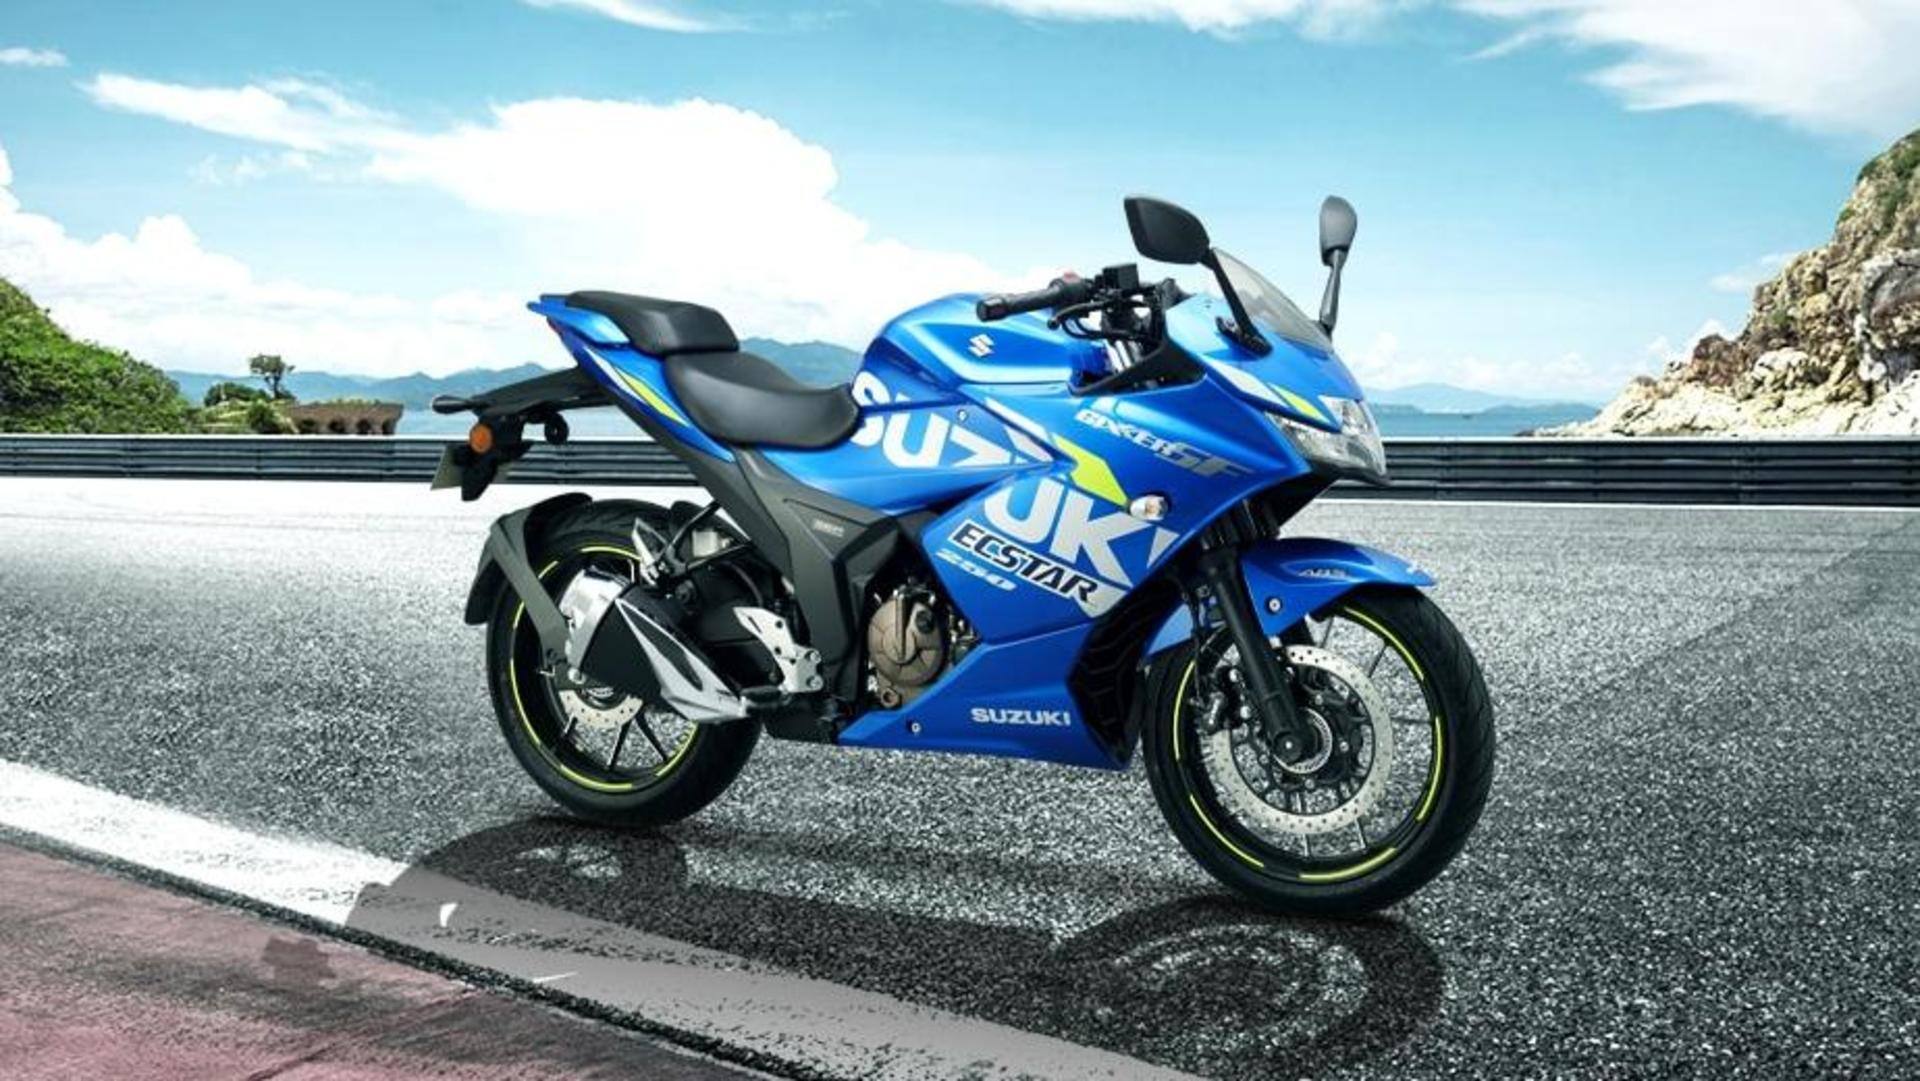 Suzuki Gixxer range gets new features and colors in India